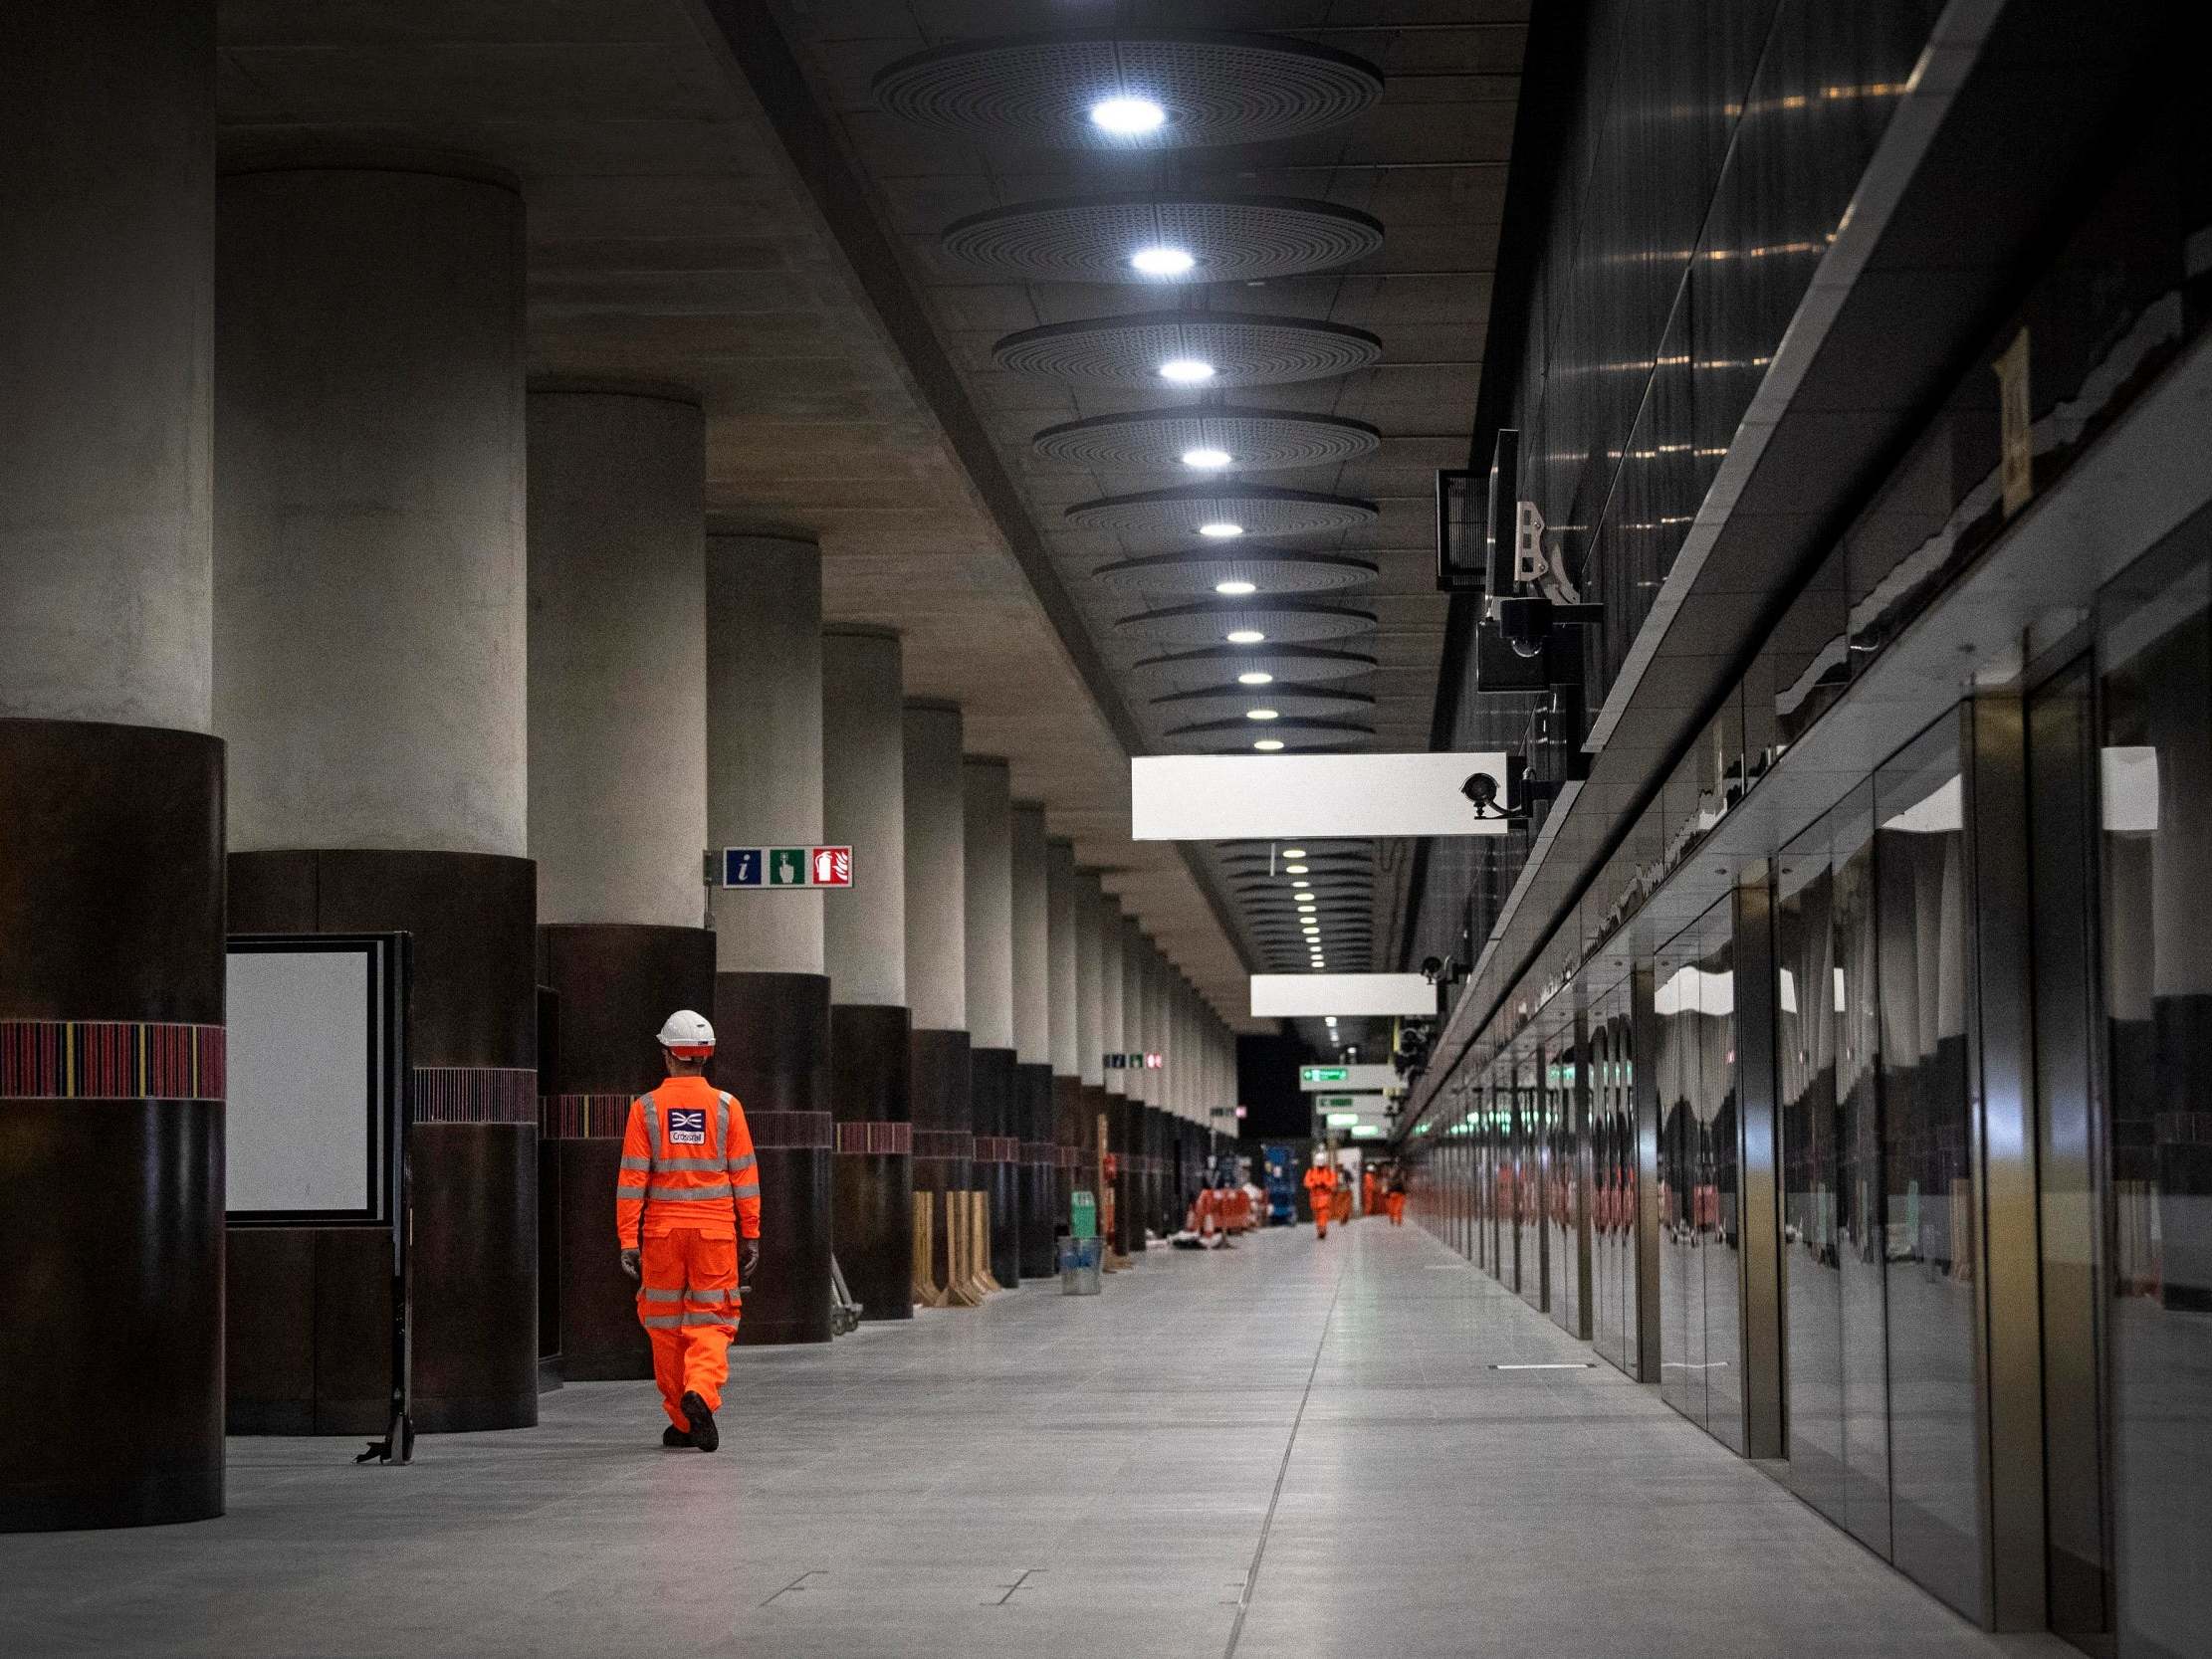 One of the platforms for the new Elizabeth line at Woolwich station